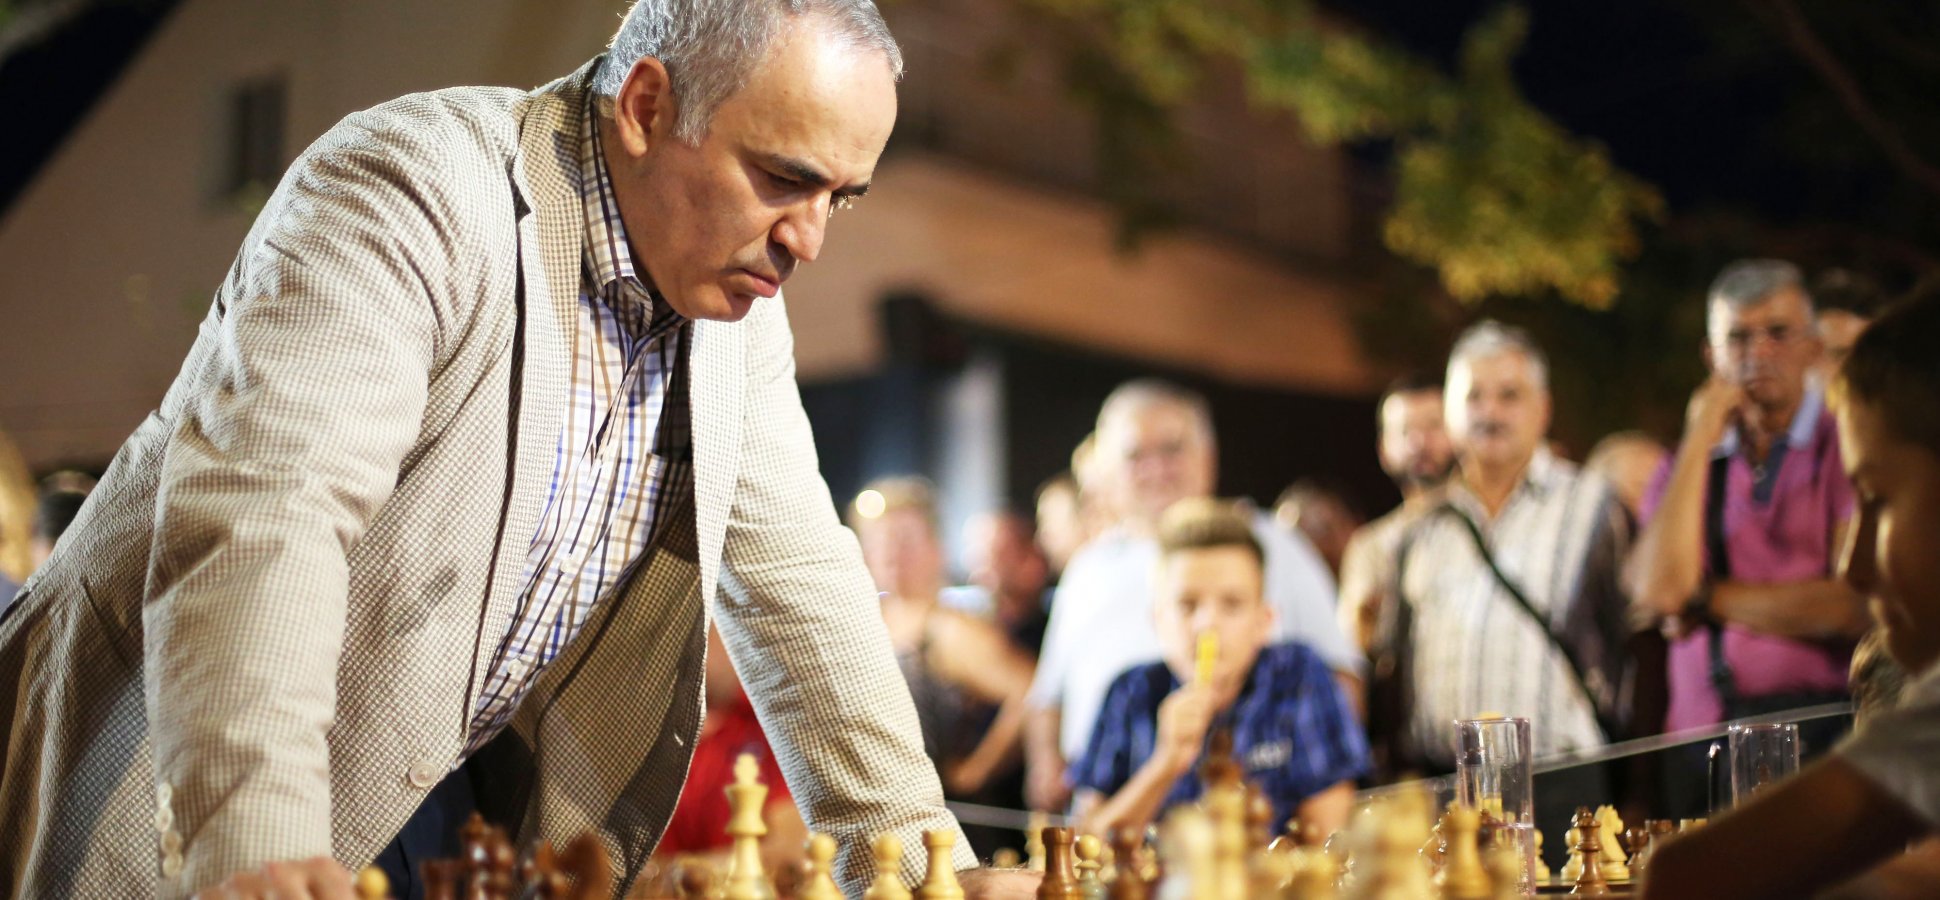 How Emotionally Intelligent People Use the Rule of the Chess Player to  Strengthen Relationships and Perform Under Pressure